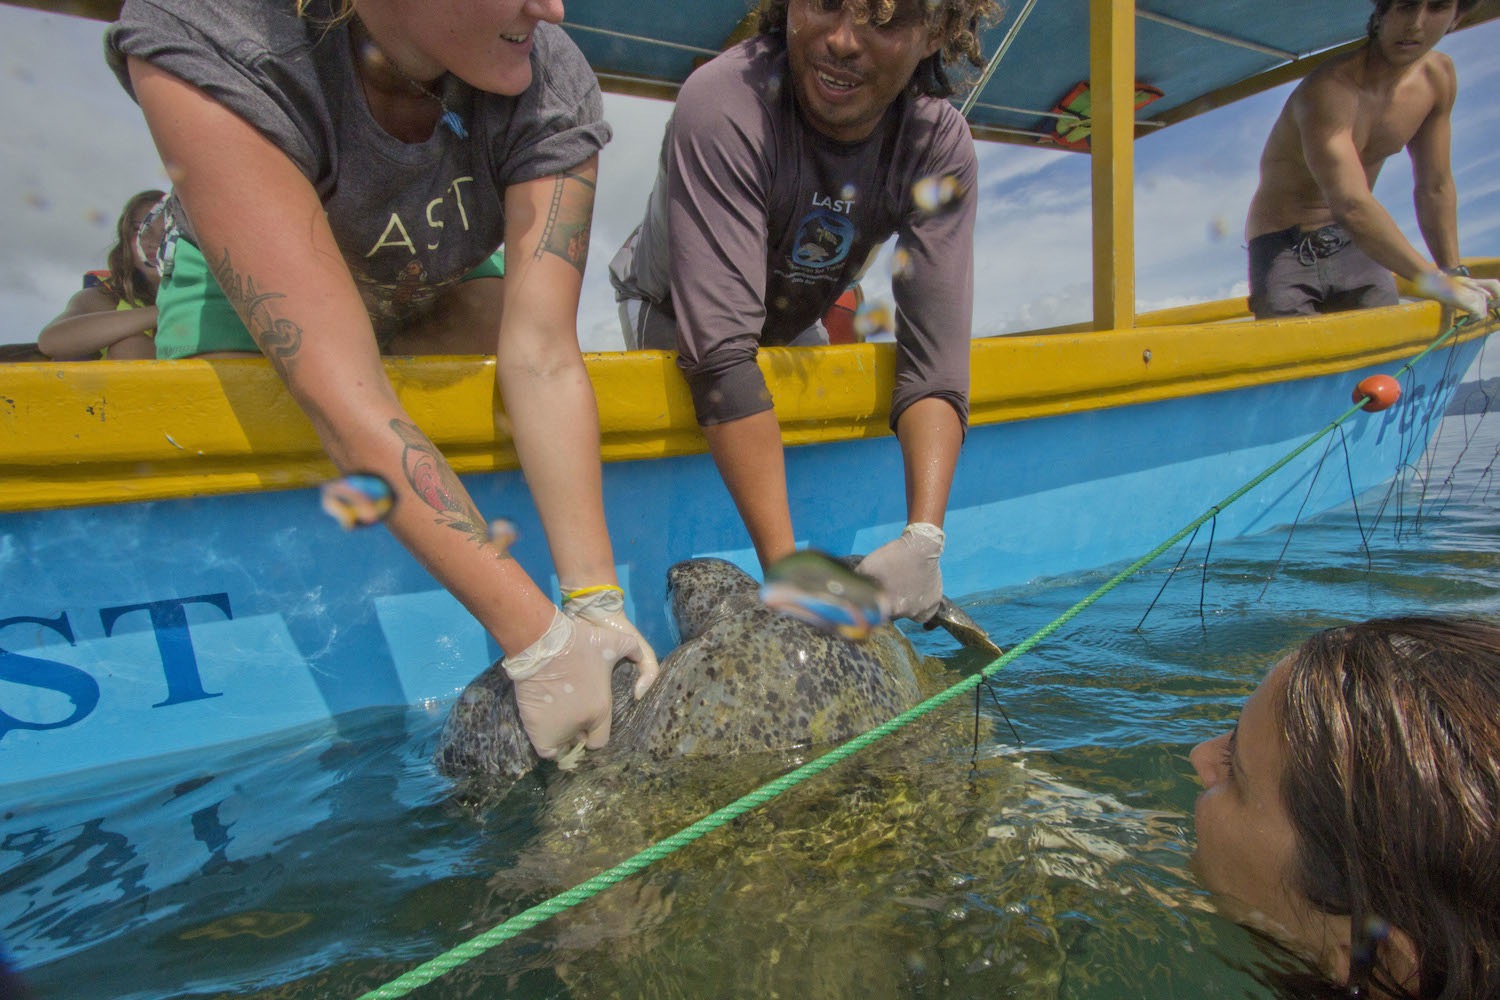 Help researchers set nets to catch the turtles